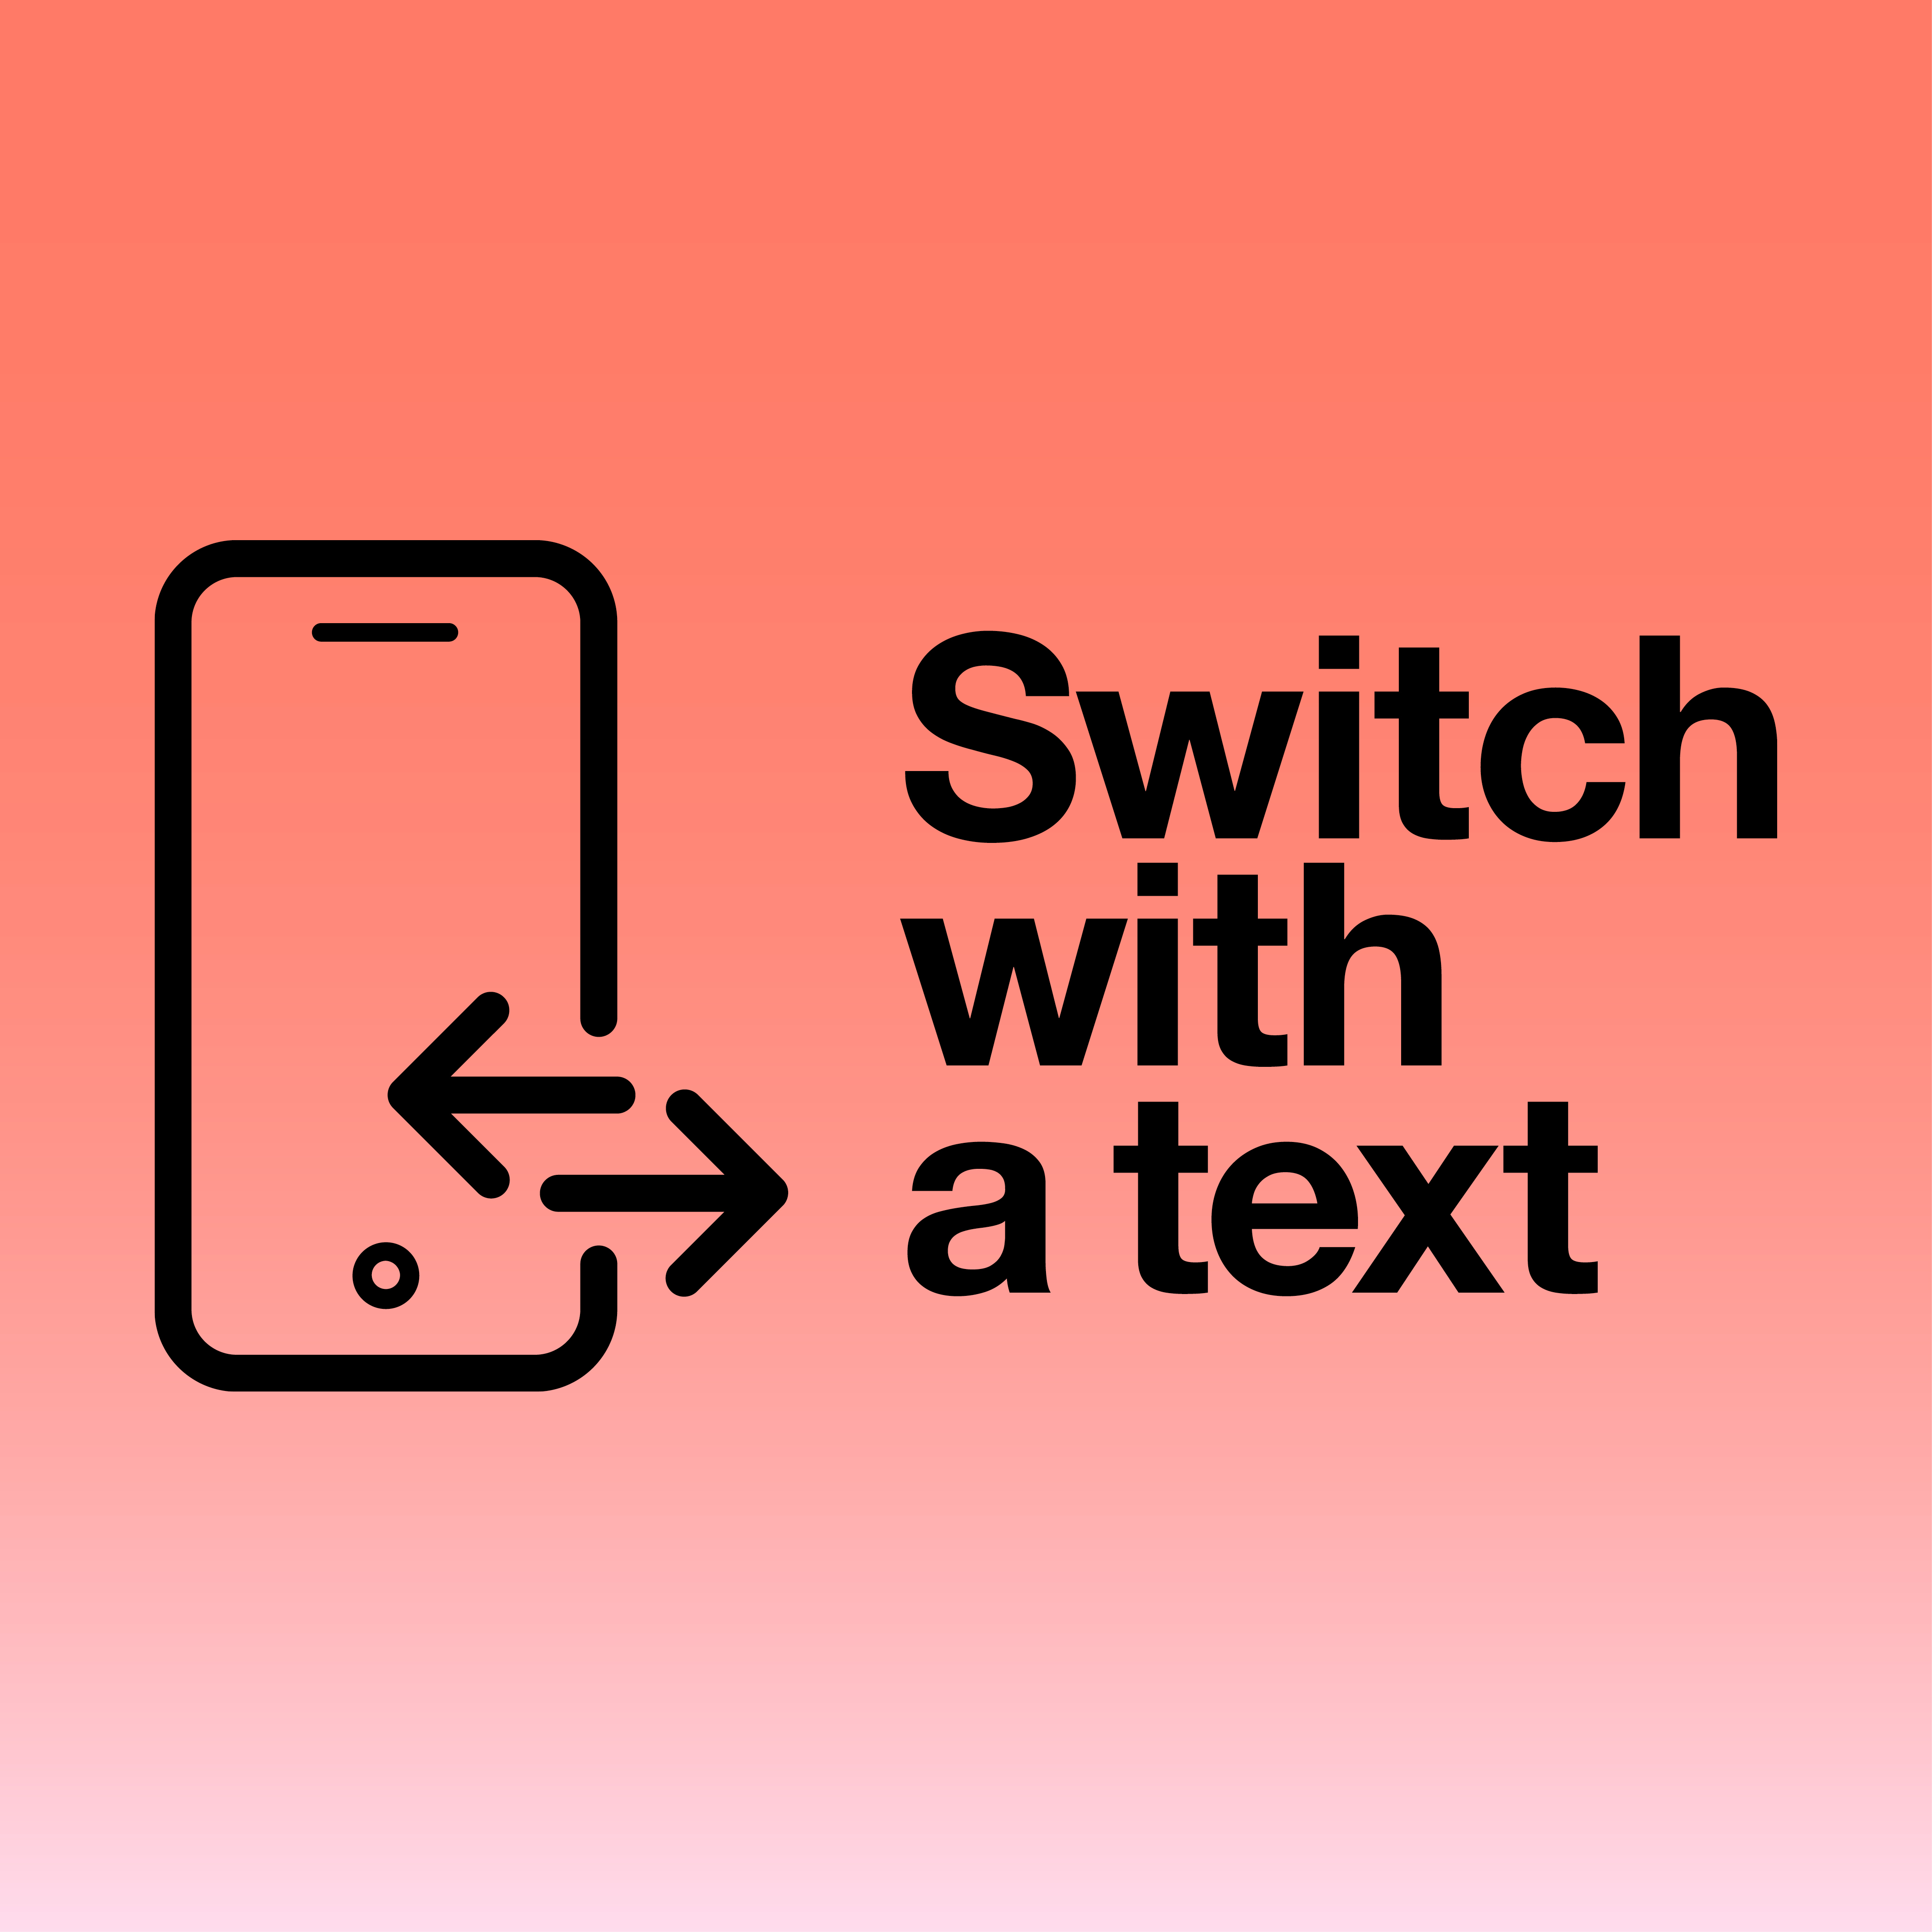 Switch with a text